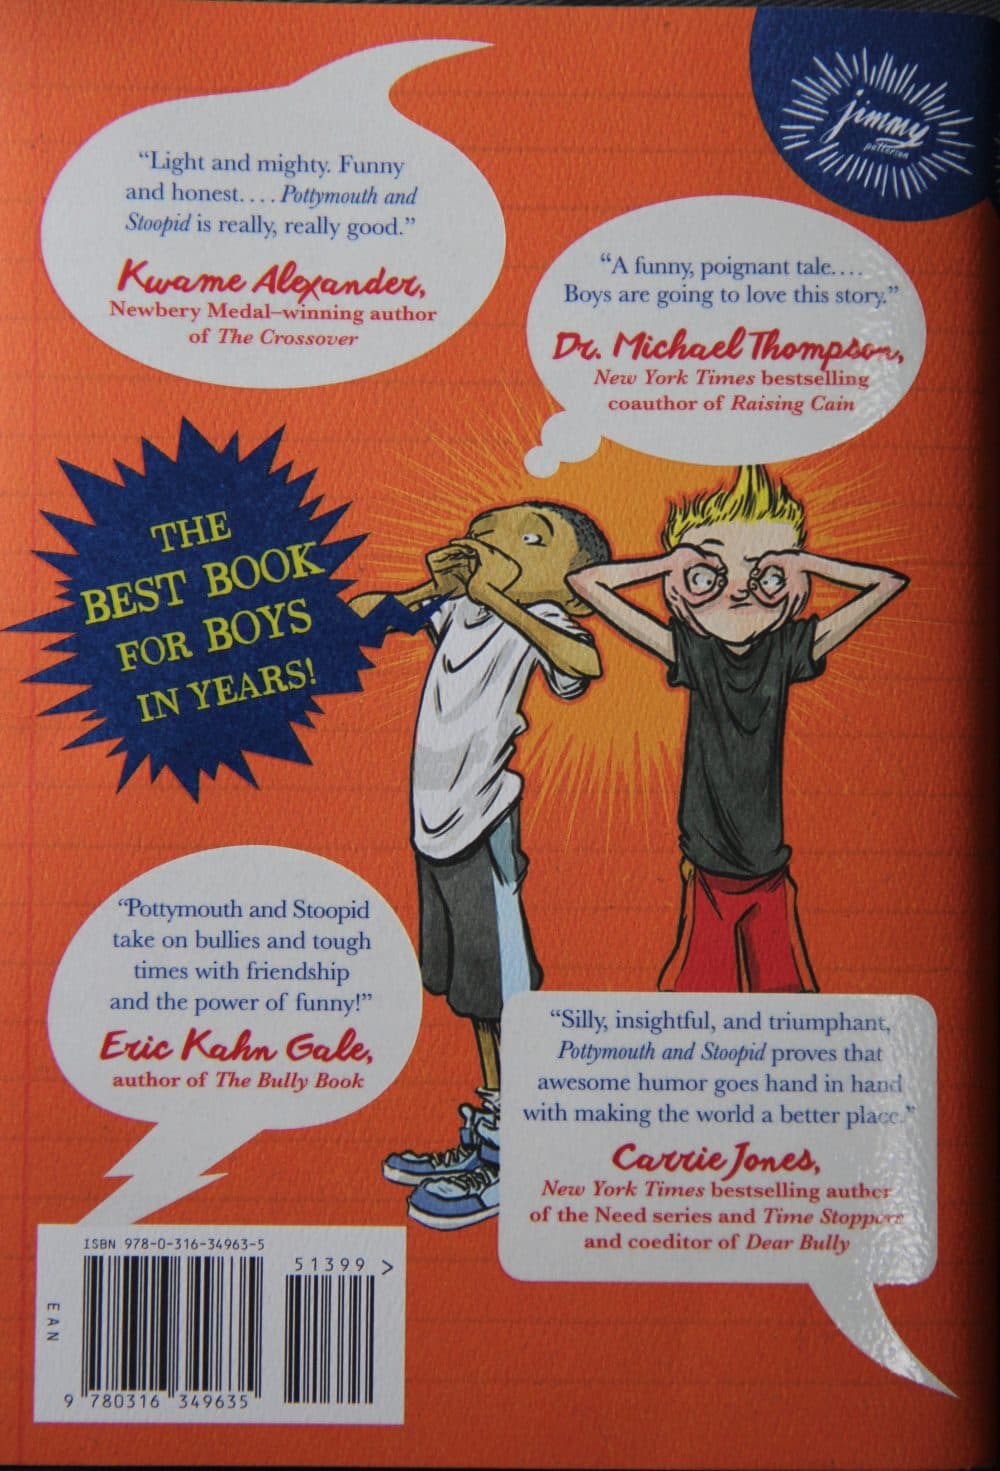 The back cover of 'Pottymouth and Stoopid,' photographed by the author. (Courtesy of Kristen M. Ploetz)